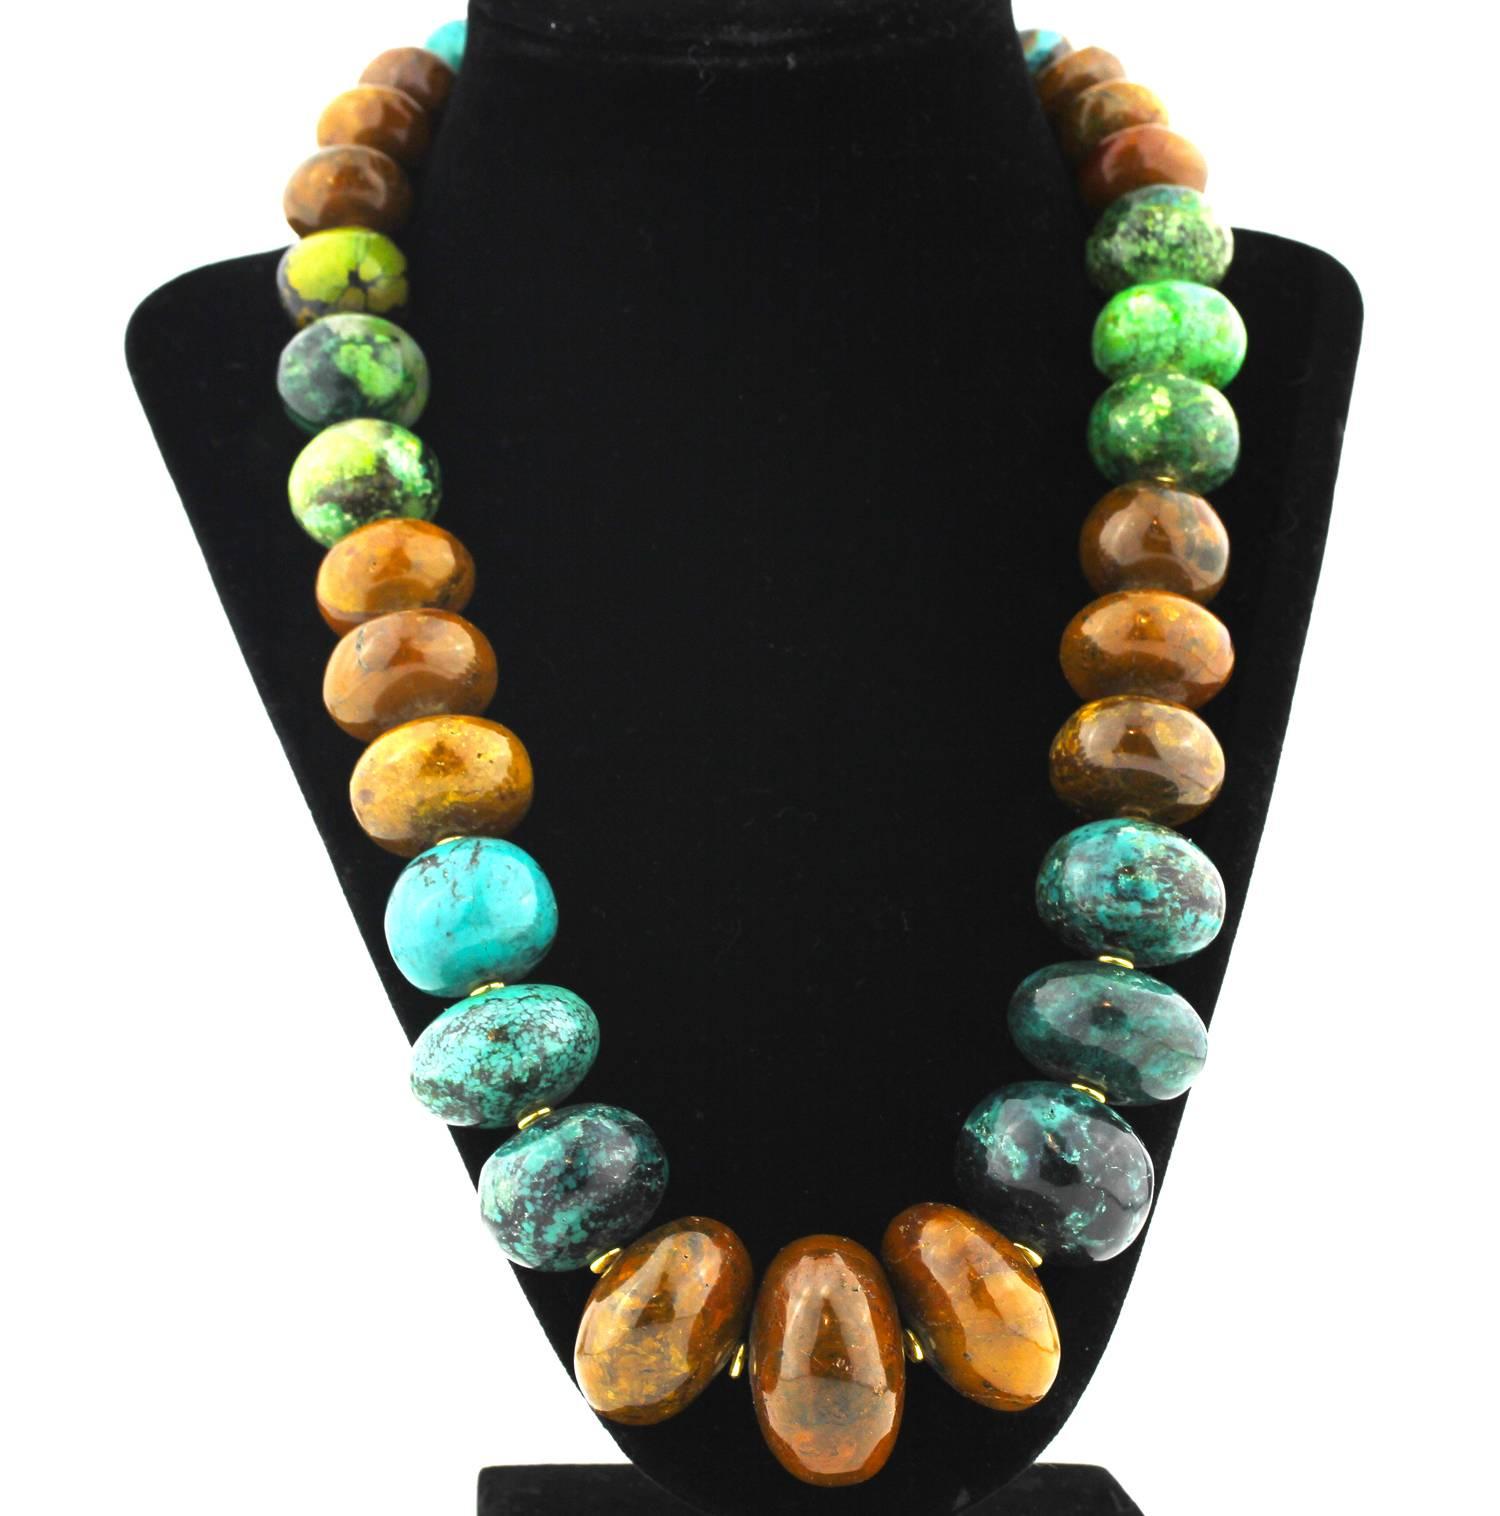 Gemjunky Graduated highly polished magnificent colors of Natural Turquoise enhanced with small gold tone accents.  These colors were carefully hand selected to compliment one another. 
This is a unique handmade necklace..It's a lovely 22.5  inches